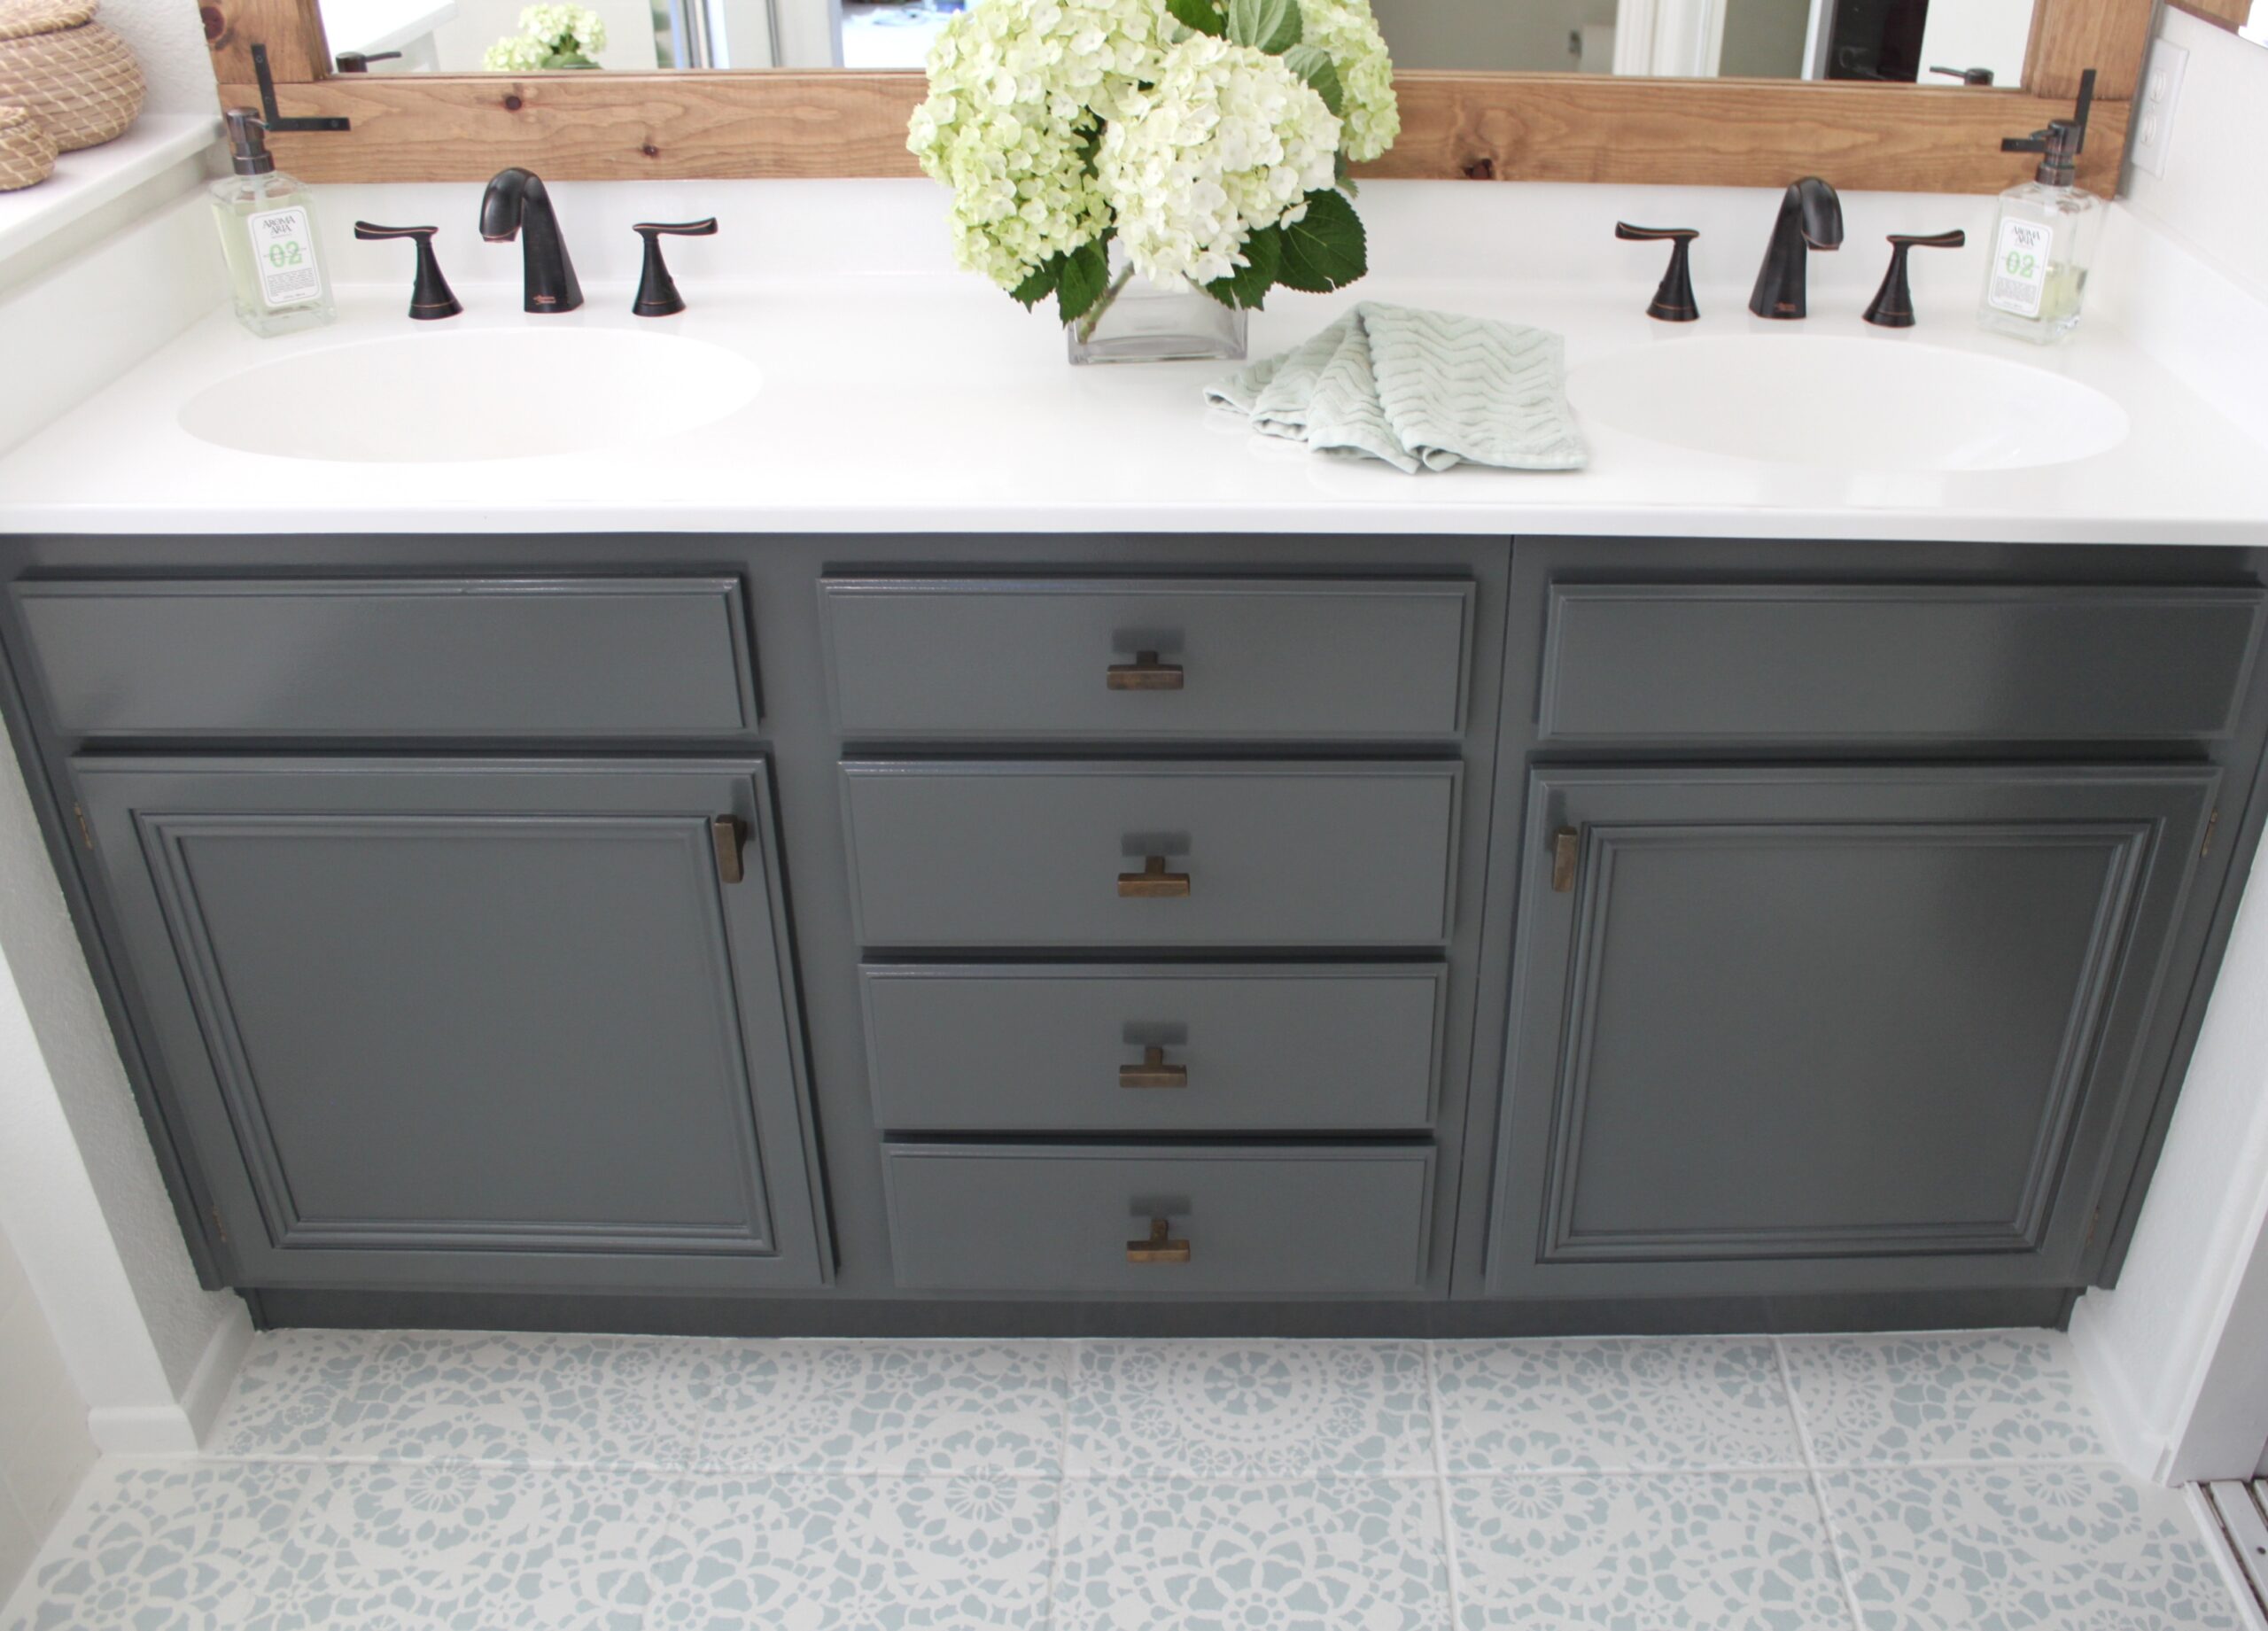 How To Refinish Bathroom Cabinets Diy, How To Build A Vanity Cabinet